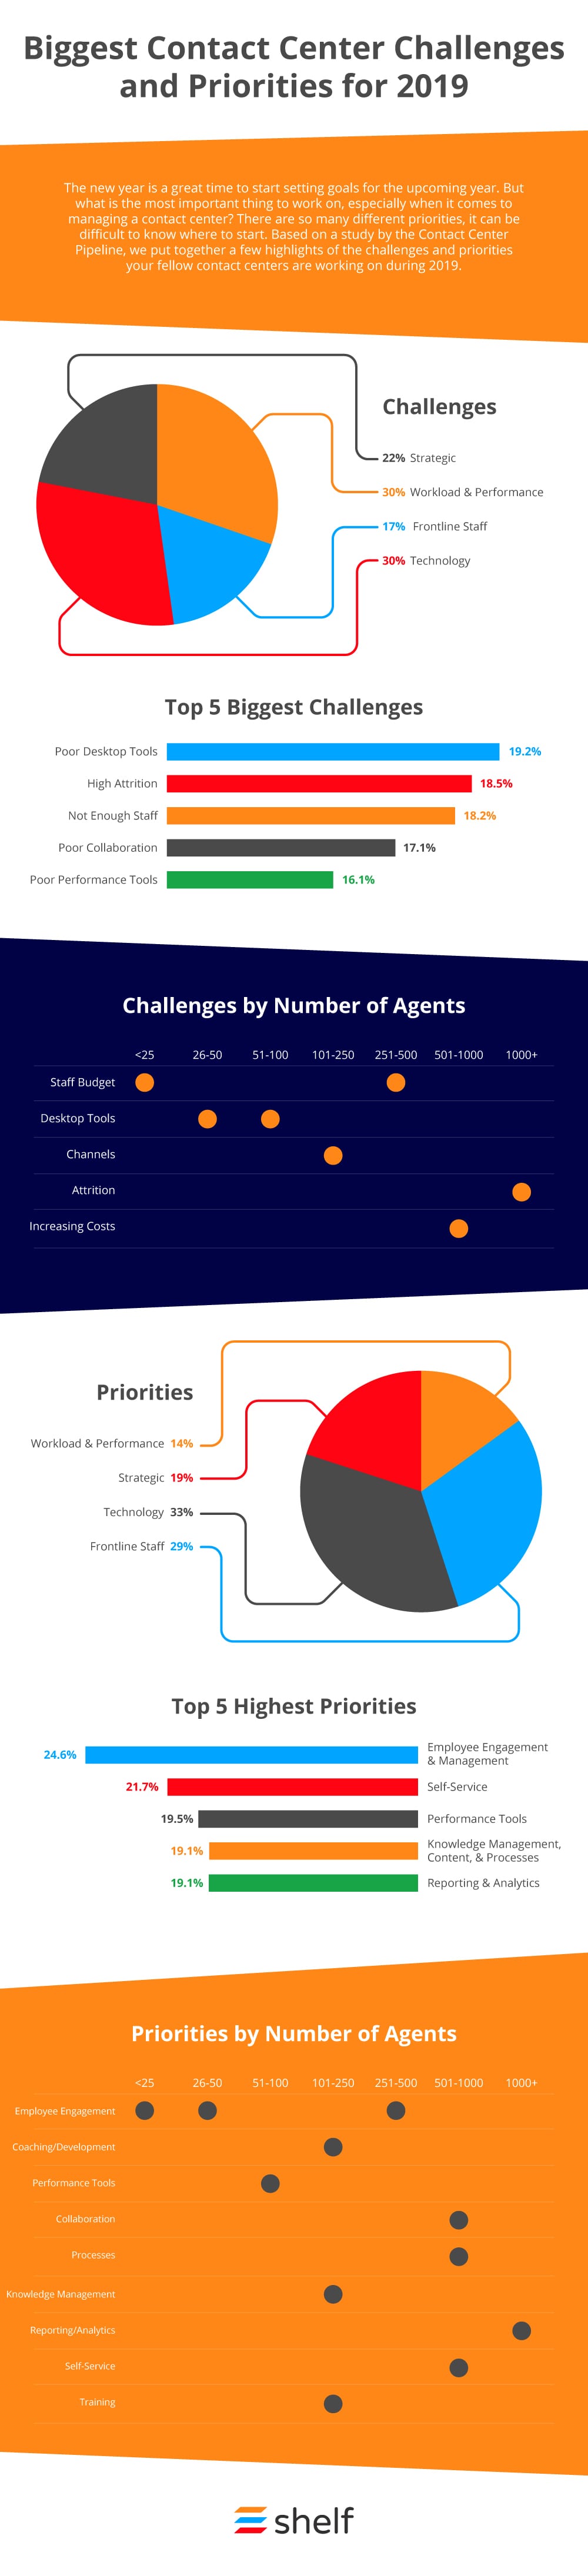 Biggest Contact Center Challenges and Priorities for 2019 | Shelf